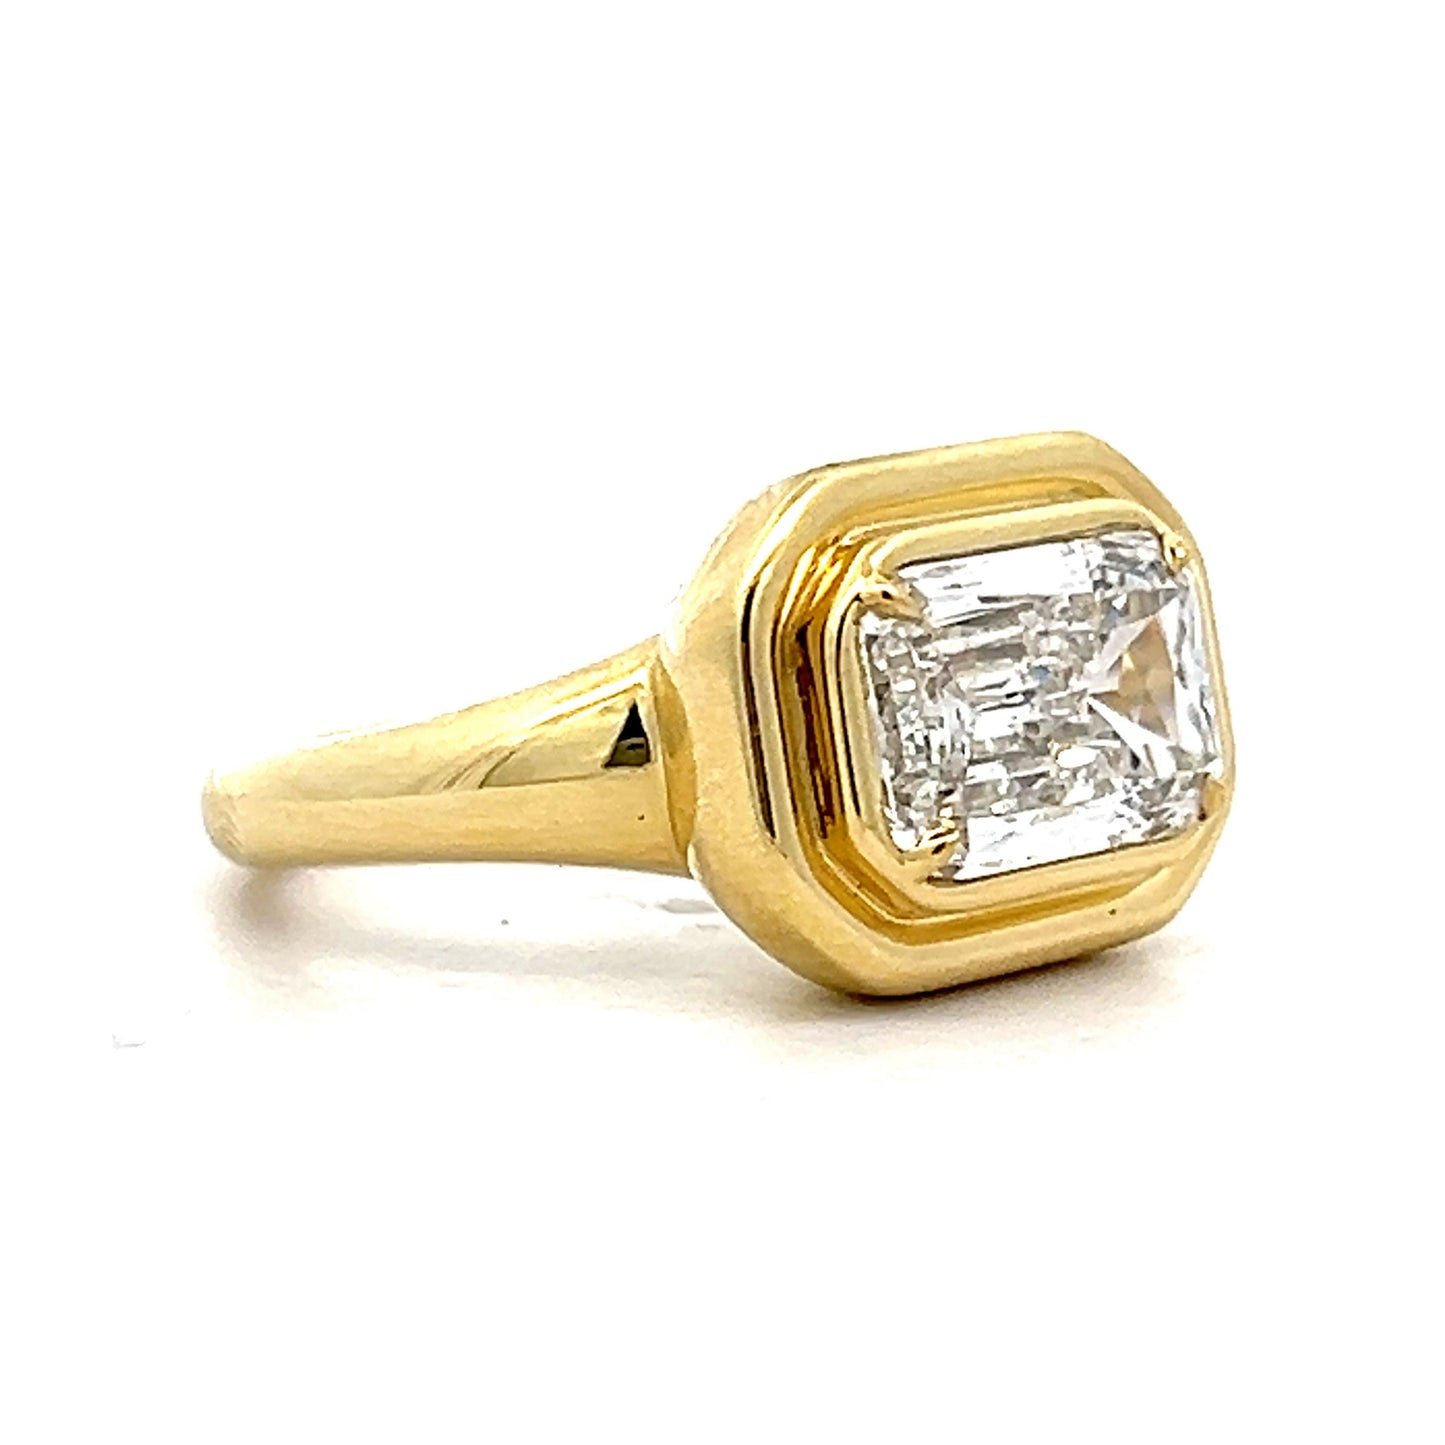 3.02 Emerald Cut Diamond Engagement Ring in Yellow Gold